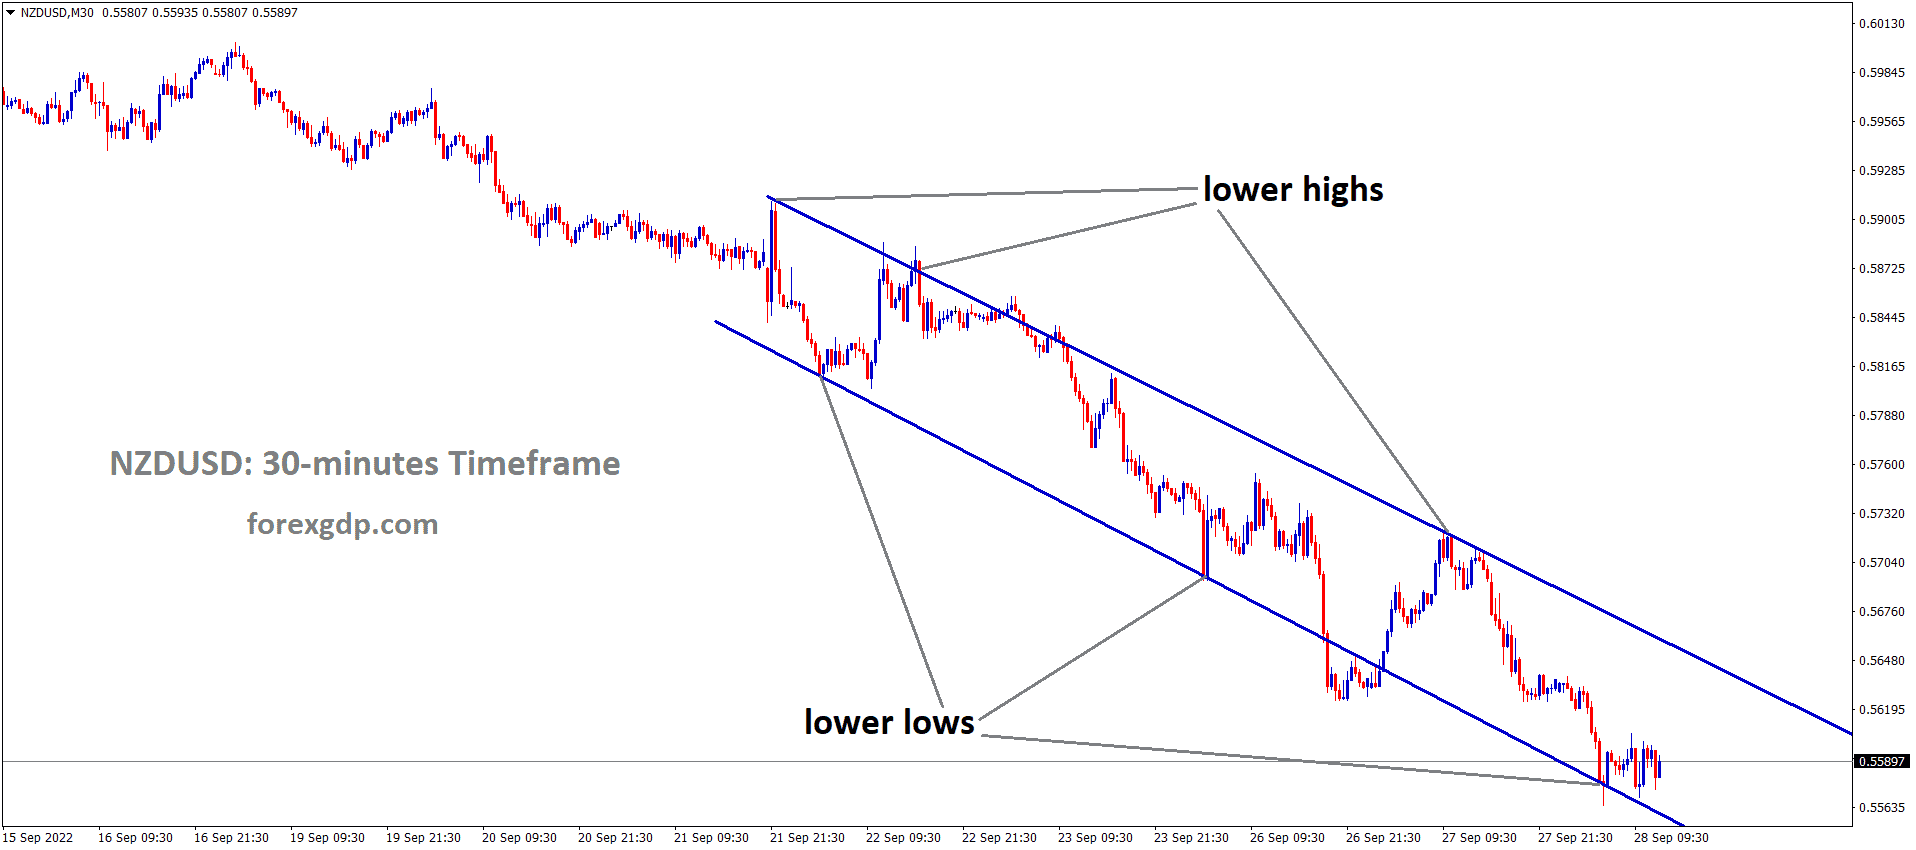 NZDUSD is moving in the Descending channel and the market has rebounded from the lower low area of the channel 1